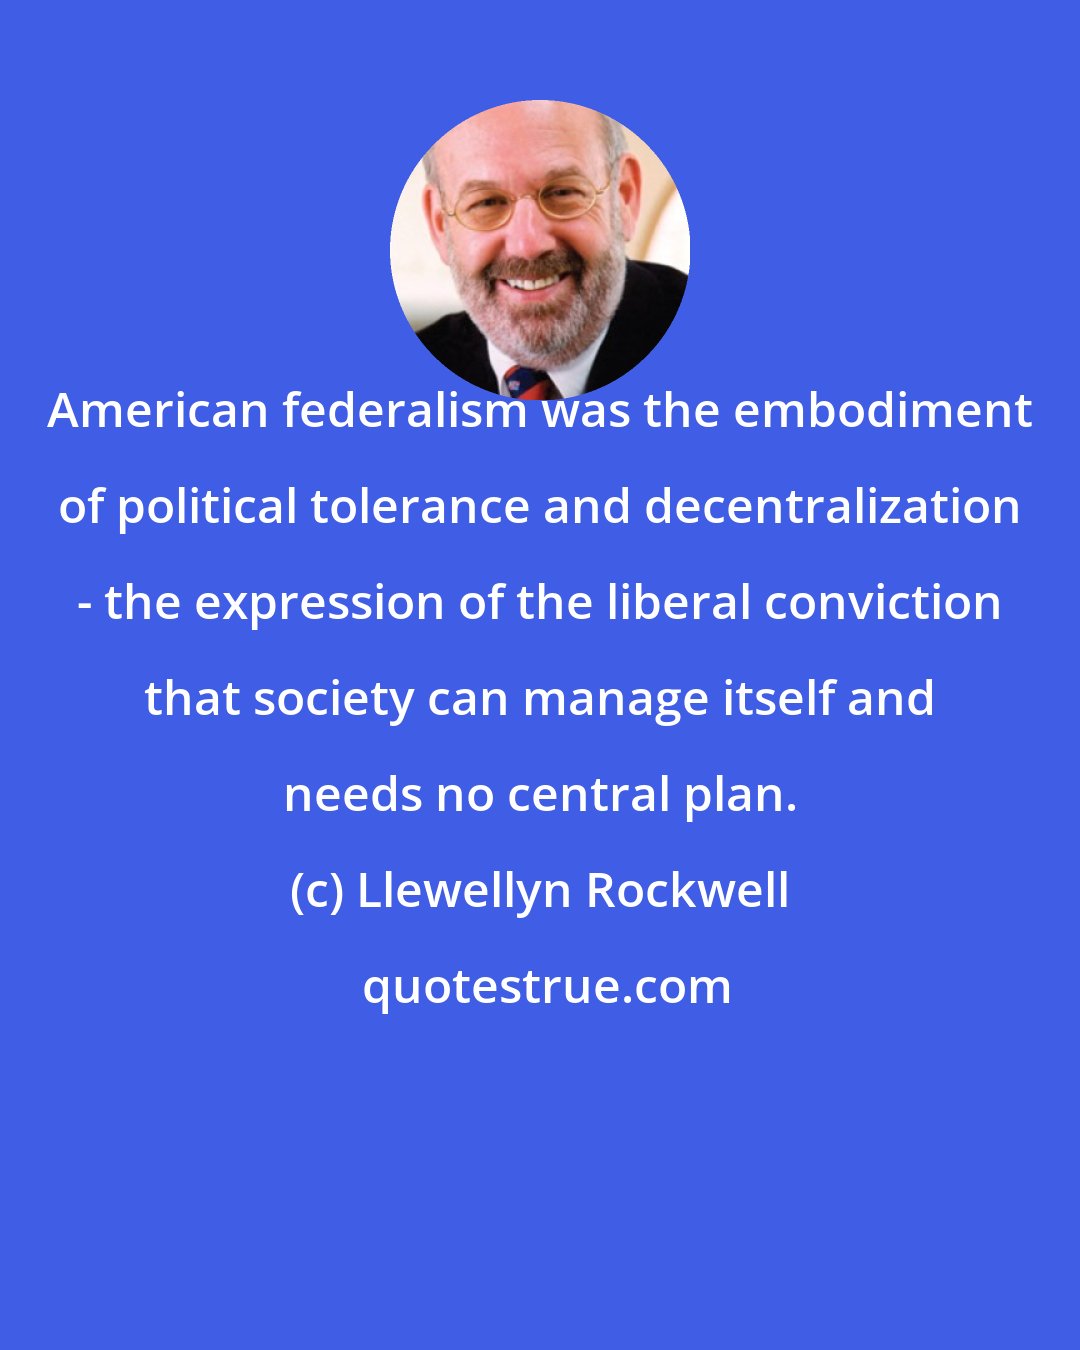 Llewellyn Rockwell: American federalism was the embodiment of political tolerance and decentralization - the expression of the liberal conviction that society can manage itself and needs no central plan.